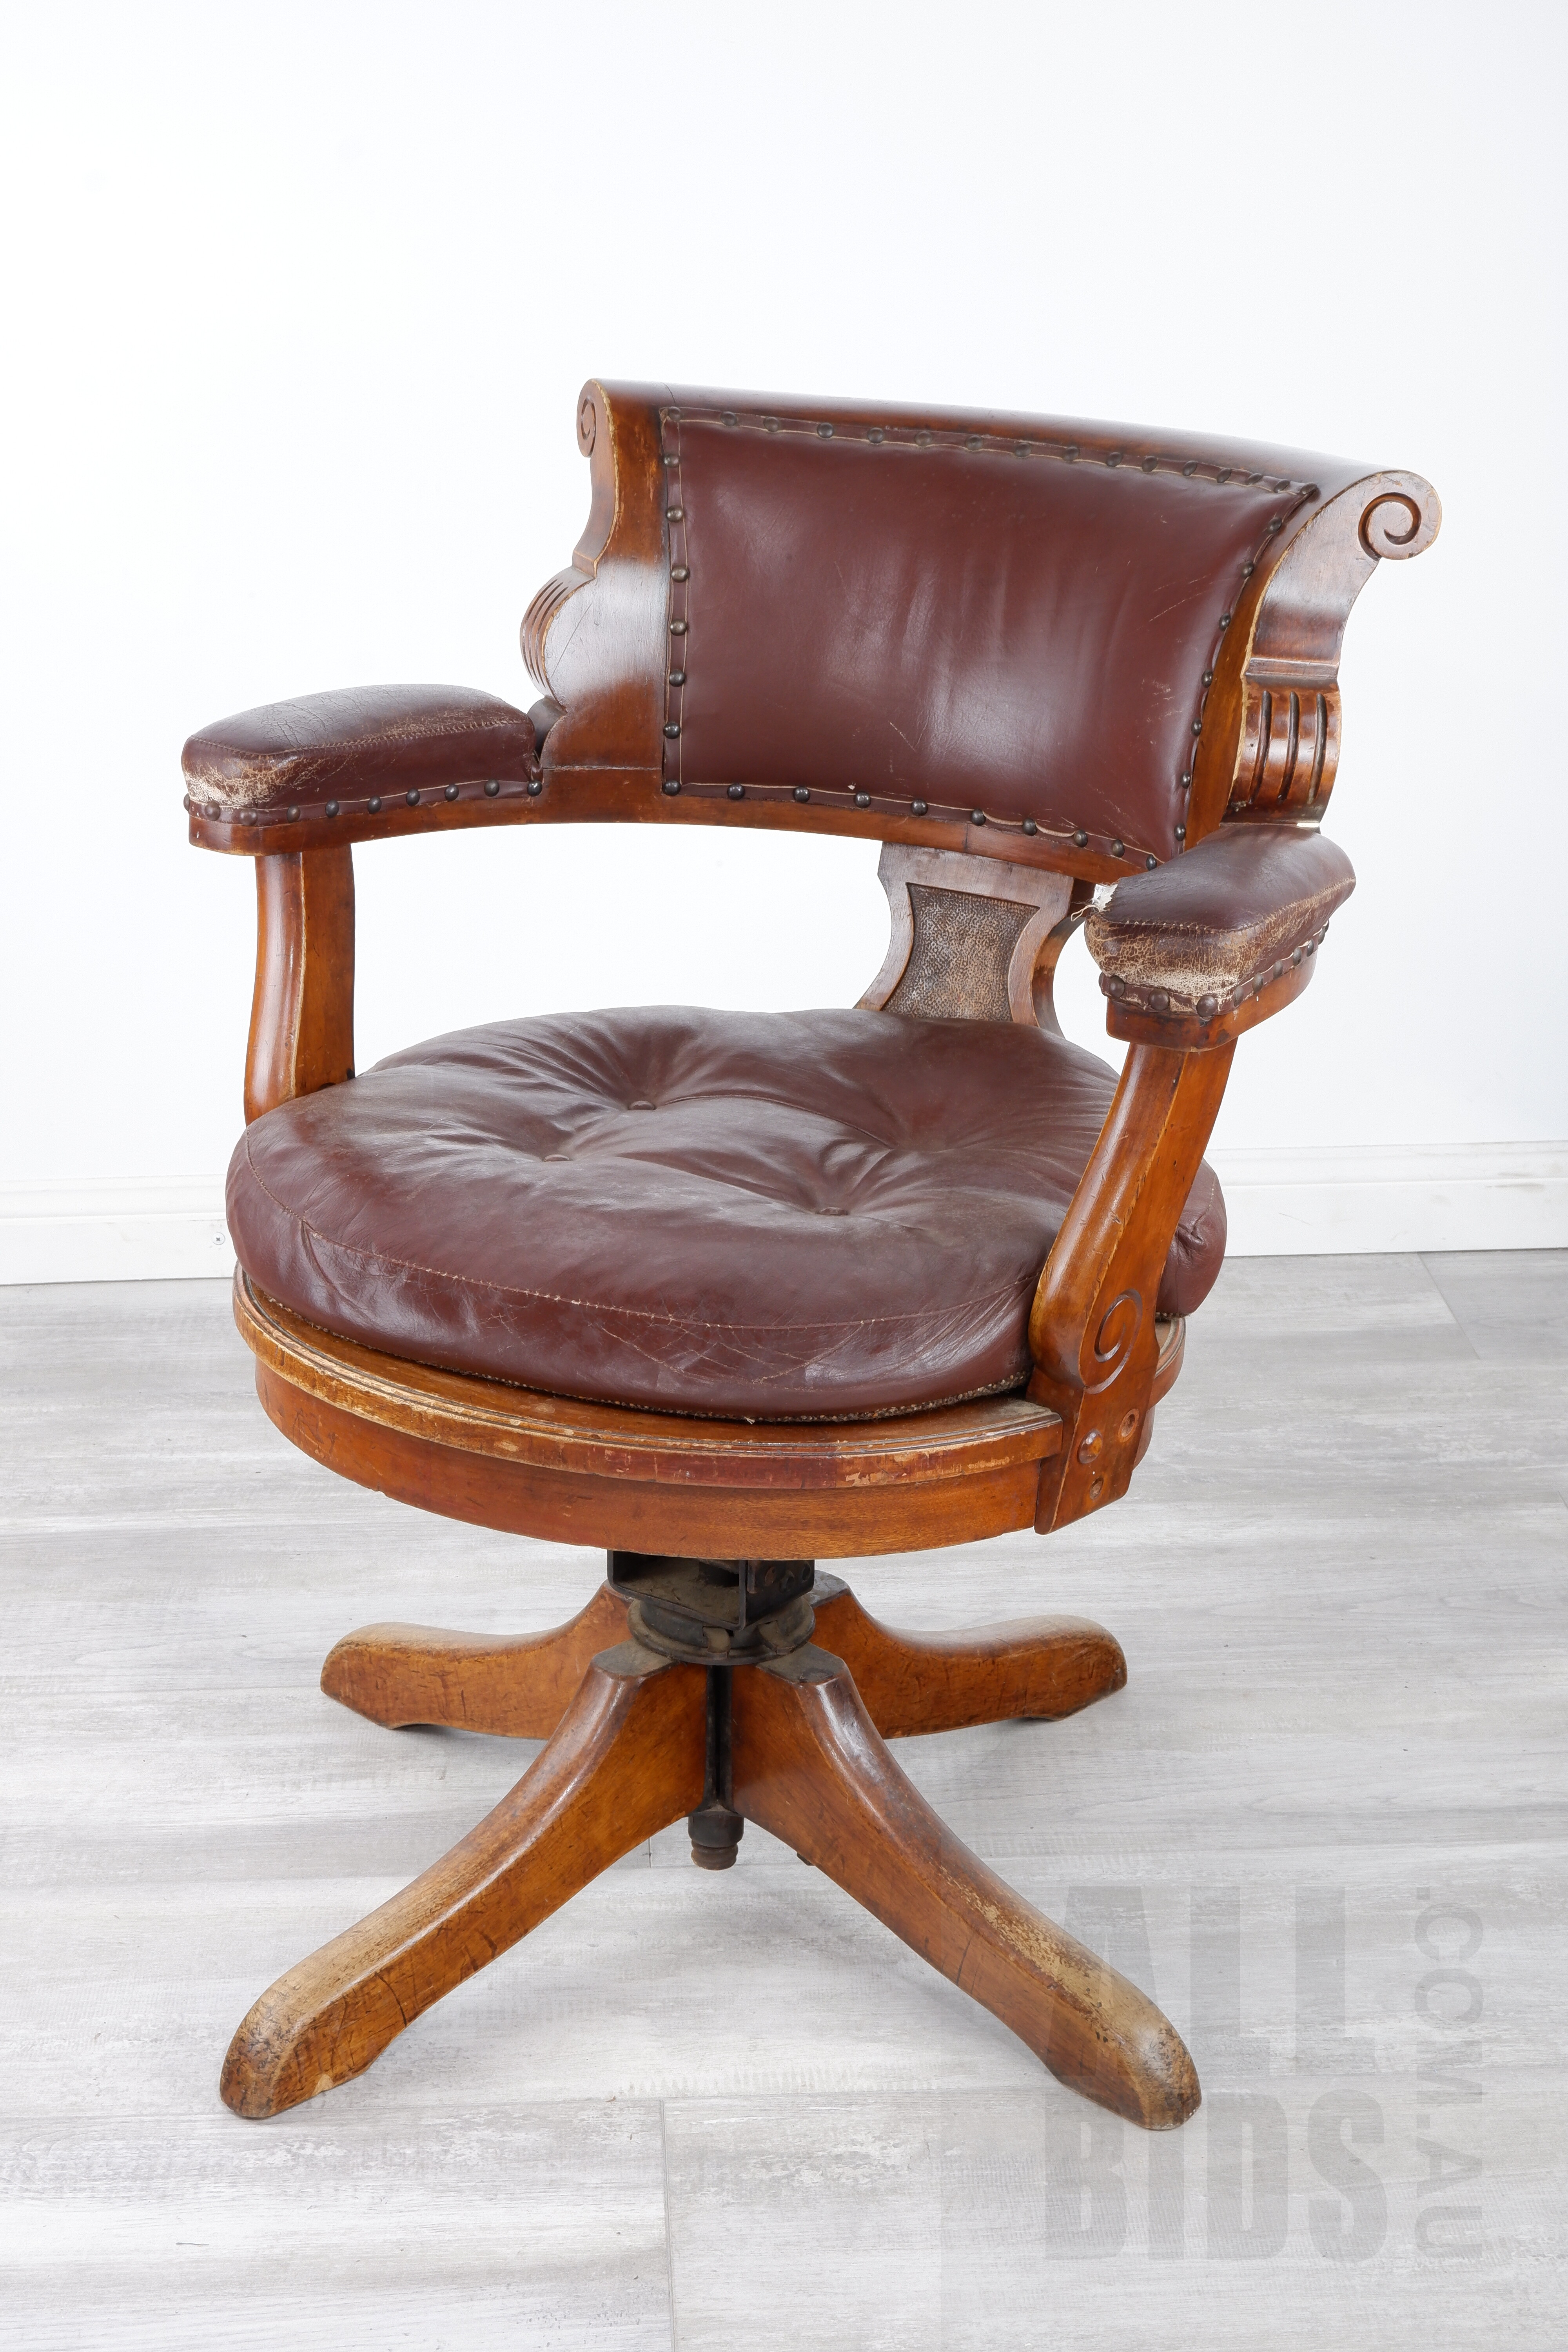 'Ex Commonwealth Government Tasmanian Blackwood and Burgundy Leather Chair, Possibly From Old Parliament House'